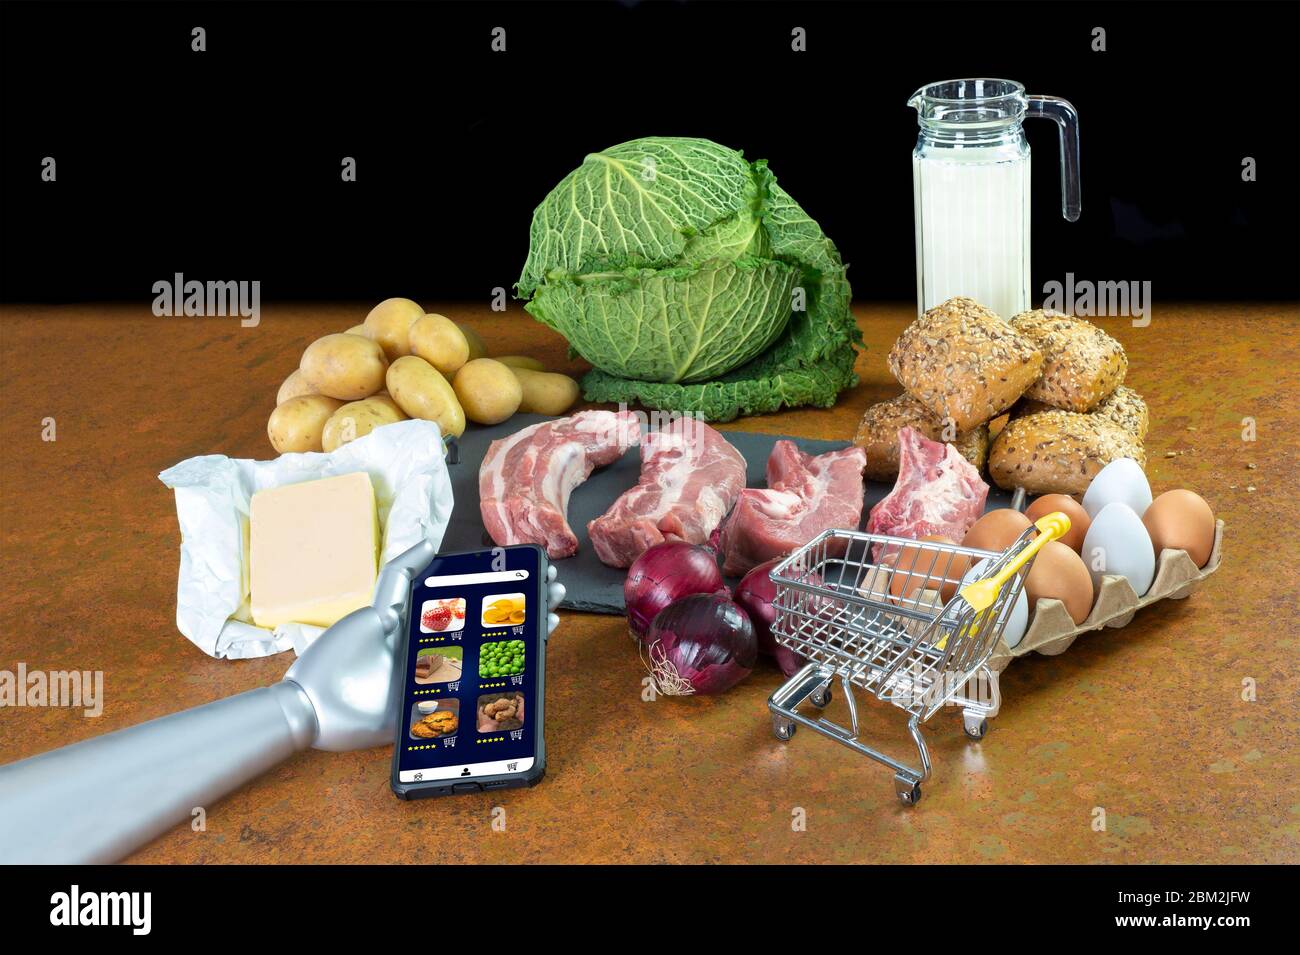 Food for basic needs. A robot arm orders via app on the smartphone. App is fictitious and royalty free. Artificial intelligence while shopping. Stock Photo